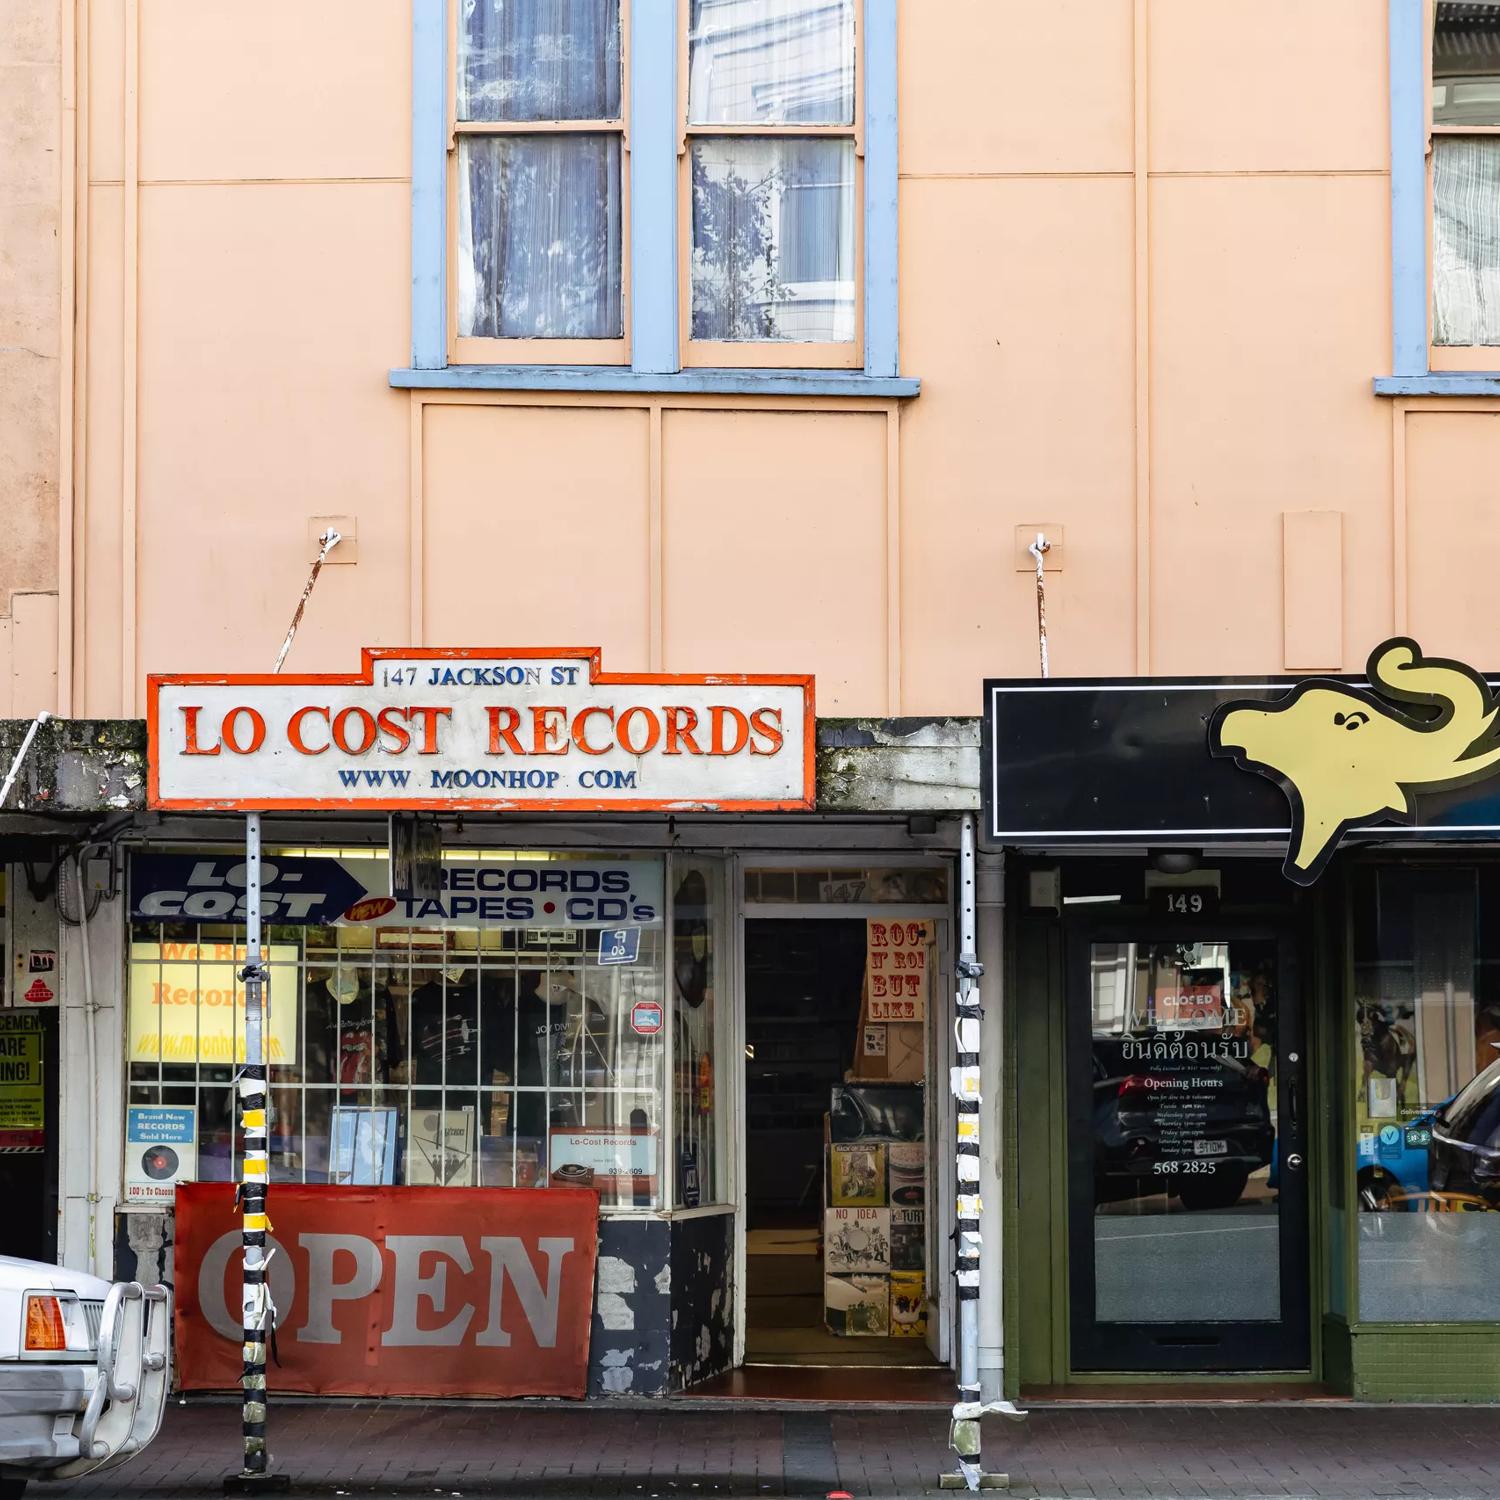 Exterior view of Lo-Cost Records/Moonhop in Petone.